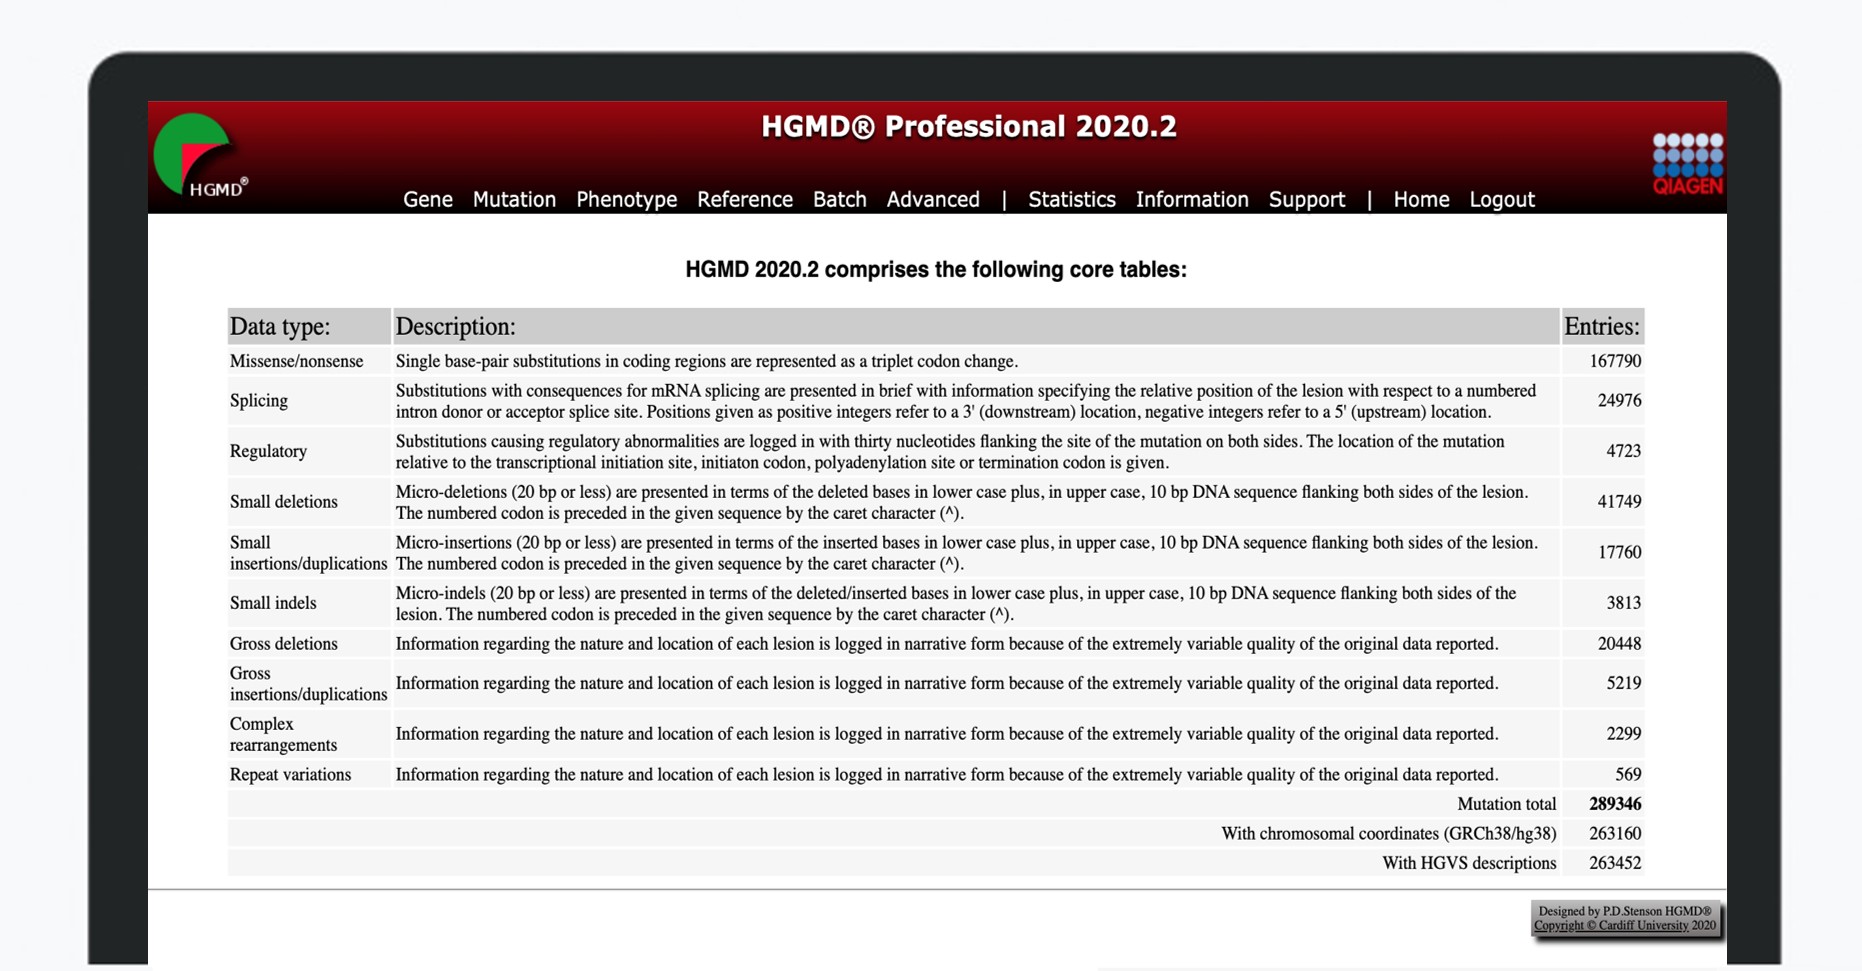 HGMD Professional 2020.2 Release